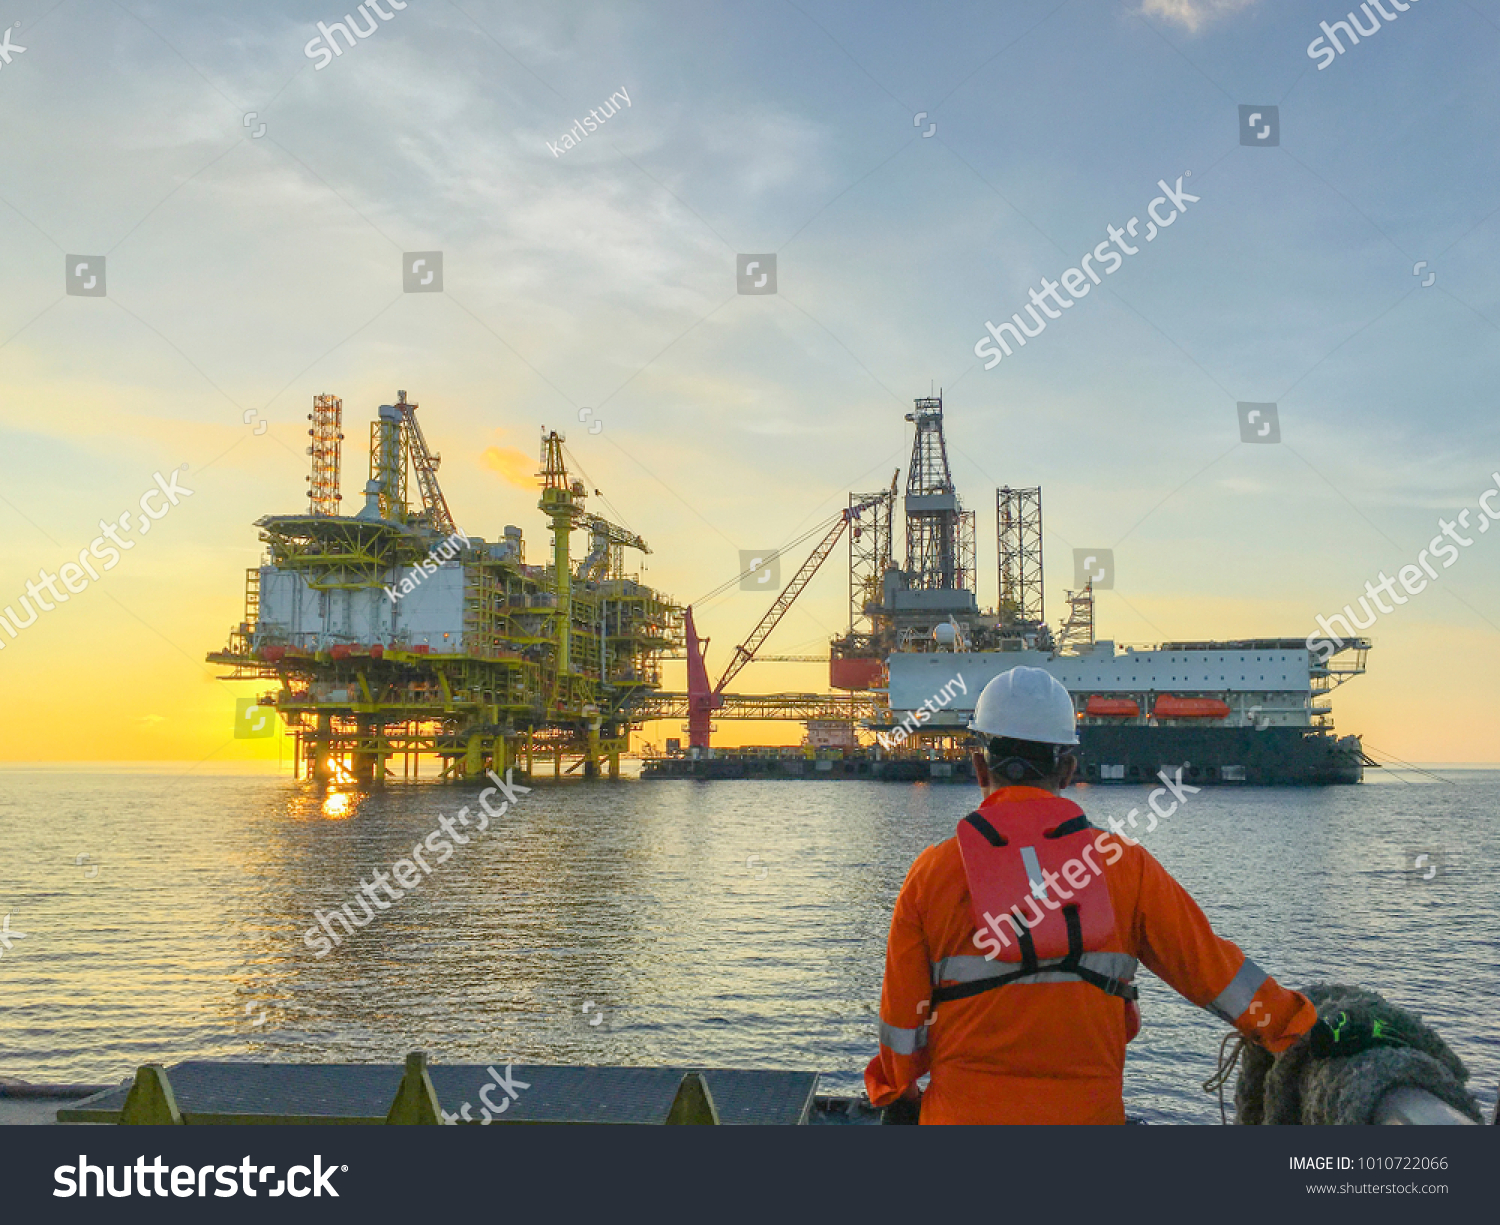 Oil and gas industry. Marine crew standing on supply vessel looking oil and gas platform during sunrise. #1010722066